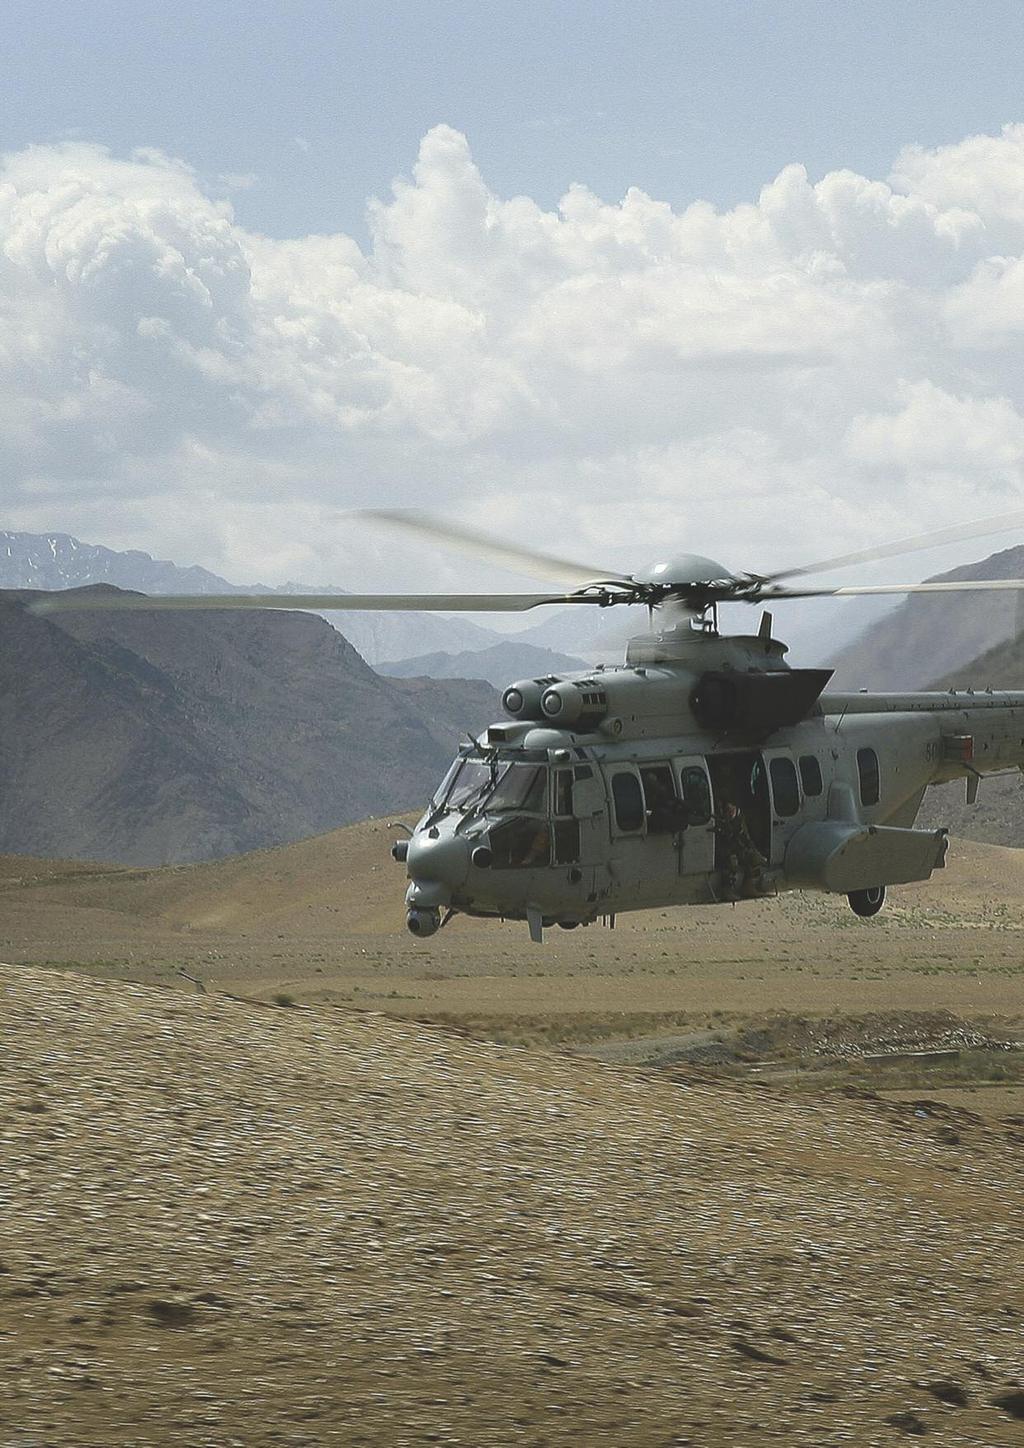 THE VALUE OF EXPERIENCE THE SUPER PUMA / COUGAR FAMILY Worldwide Civil and Military Operations The H225M has evolved from the vast experience accumulated by some